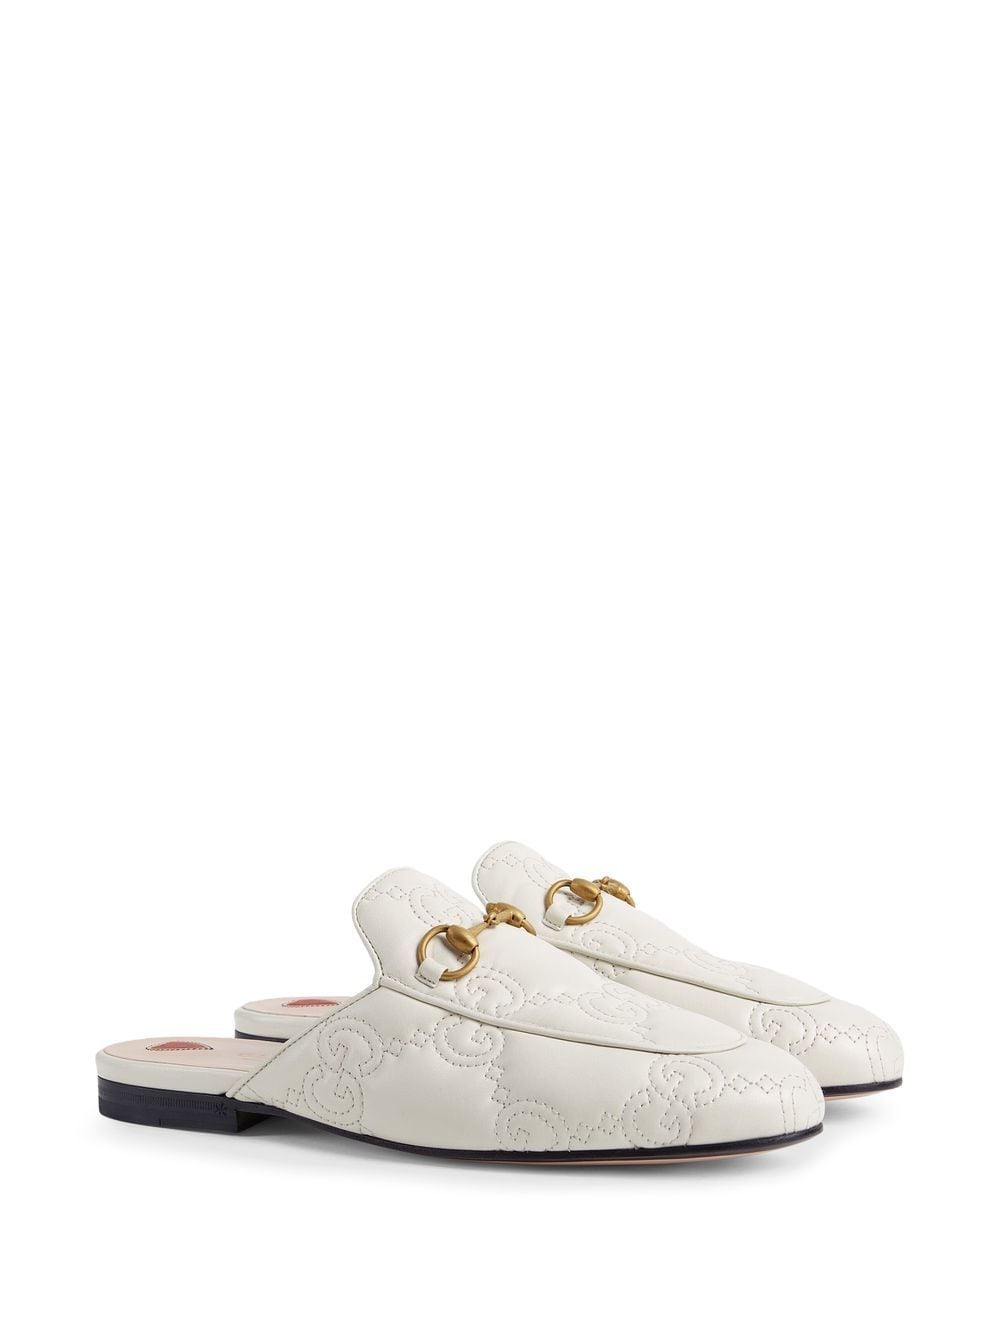 GUCCI Princetown logo embossed slippers